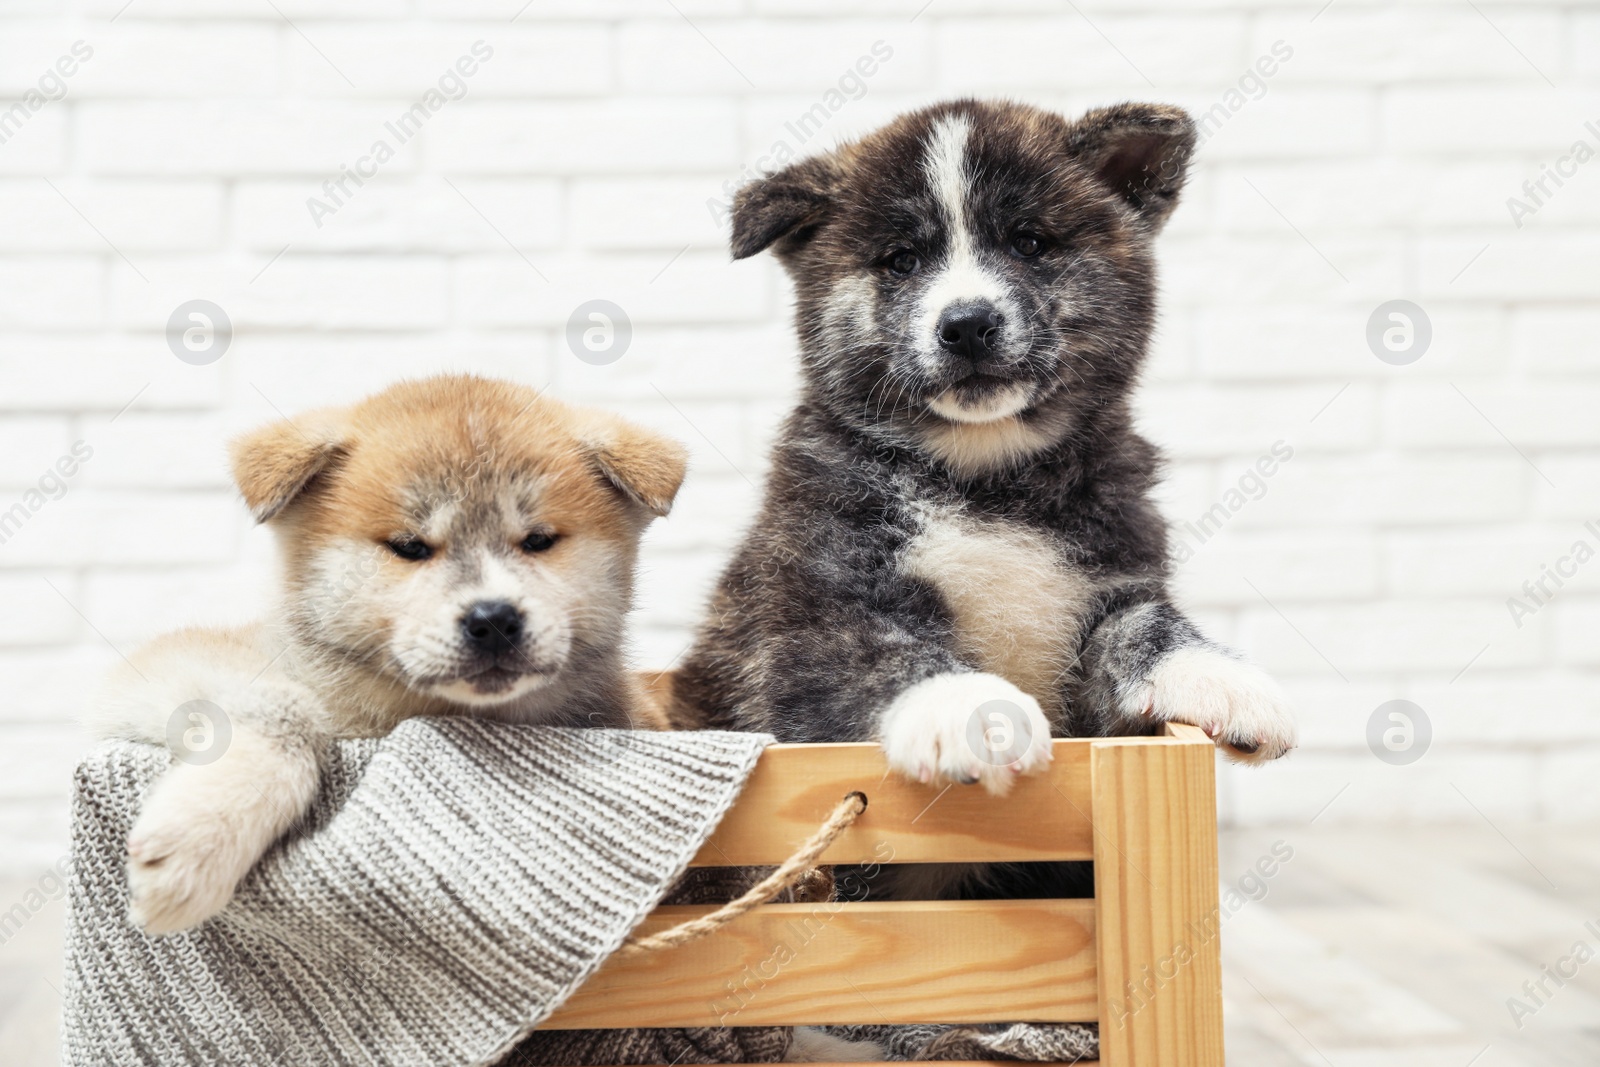 Photo of Akita inu puppies in wooden crate against white brick wall. Cute dogs